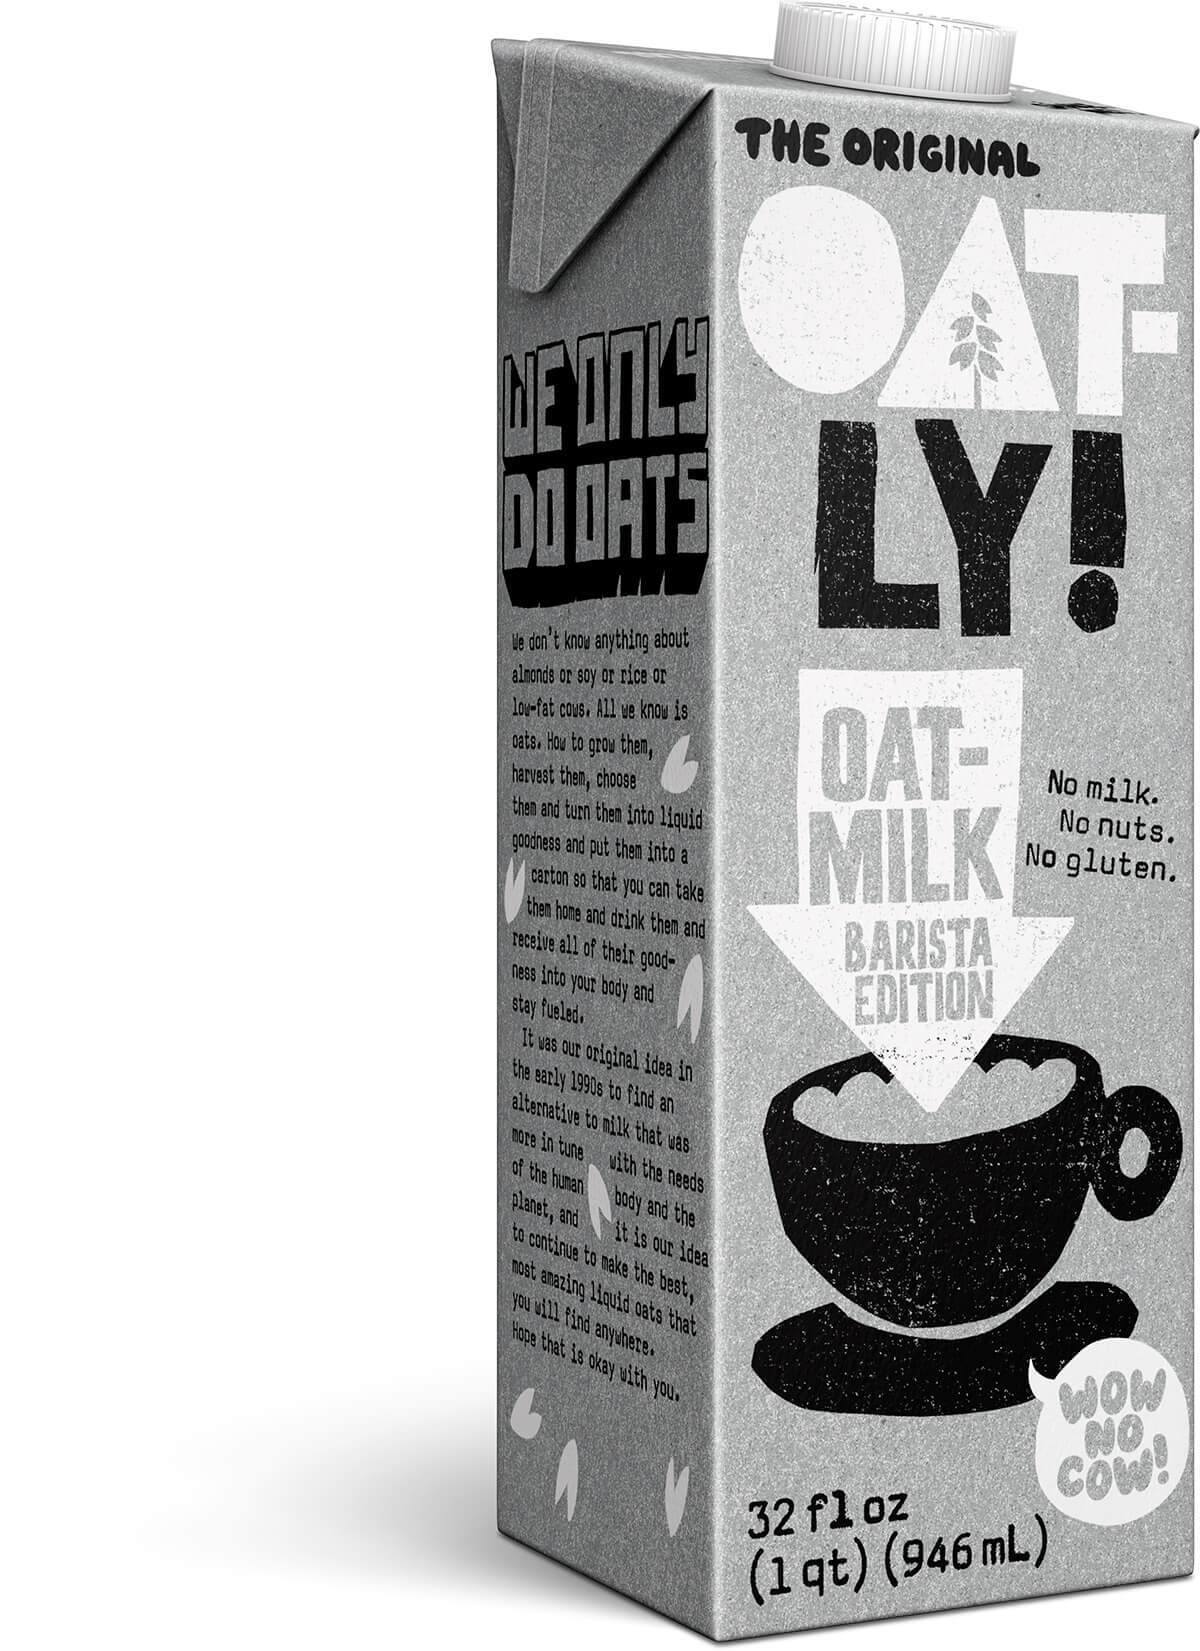 Barista sells 1,000+ cups of milk in Louisville, KY - LOUtoday